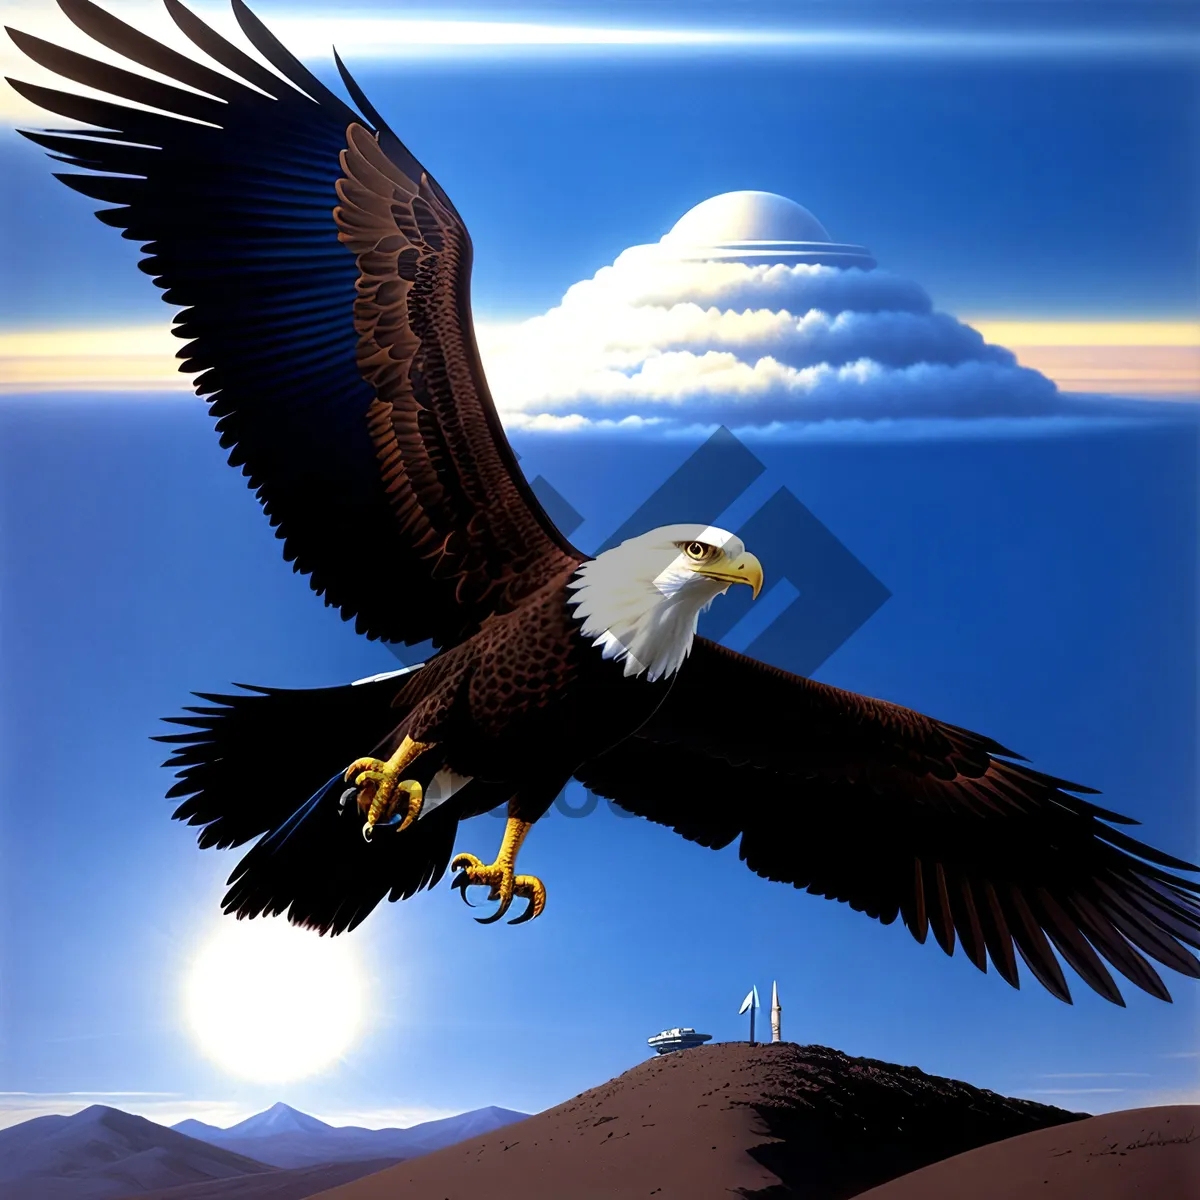 Picture of Stunning Bald Eagle Spreading Its Majestic Wings